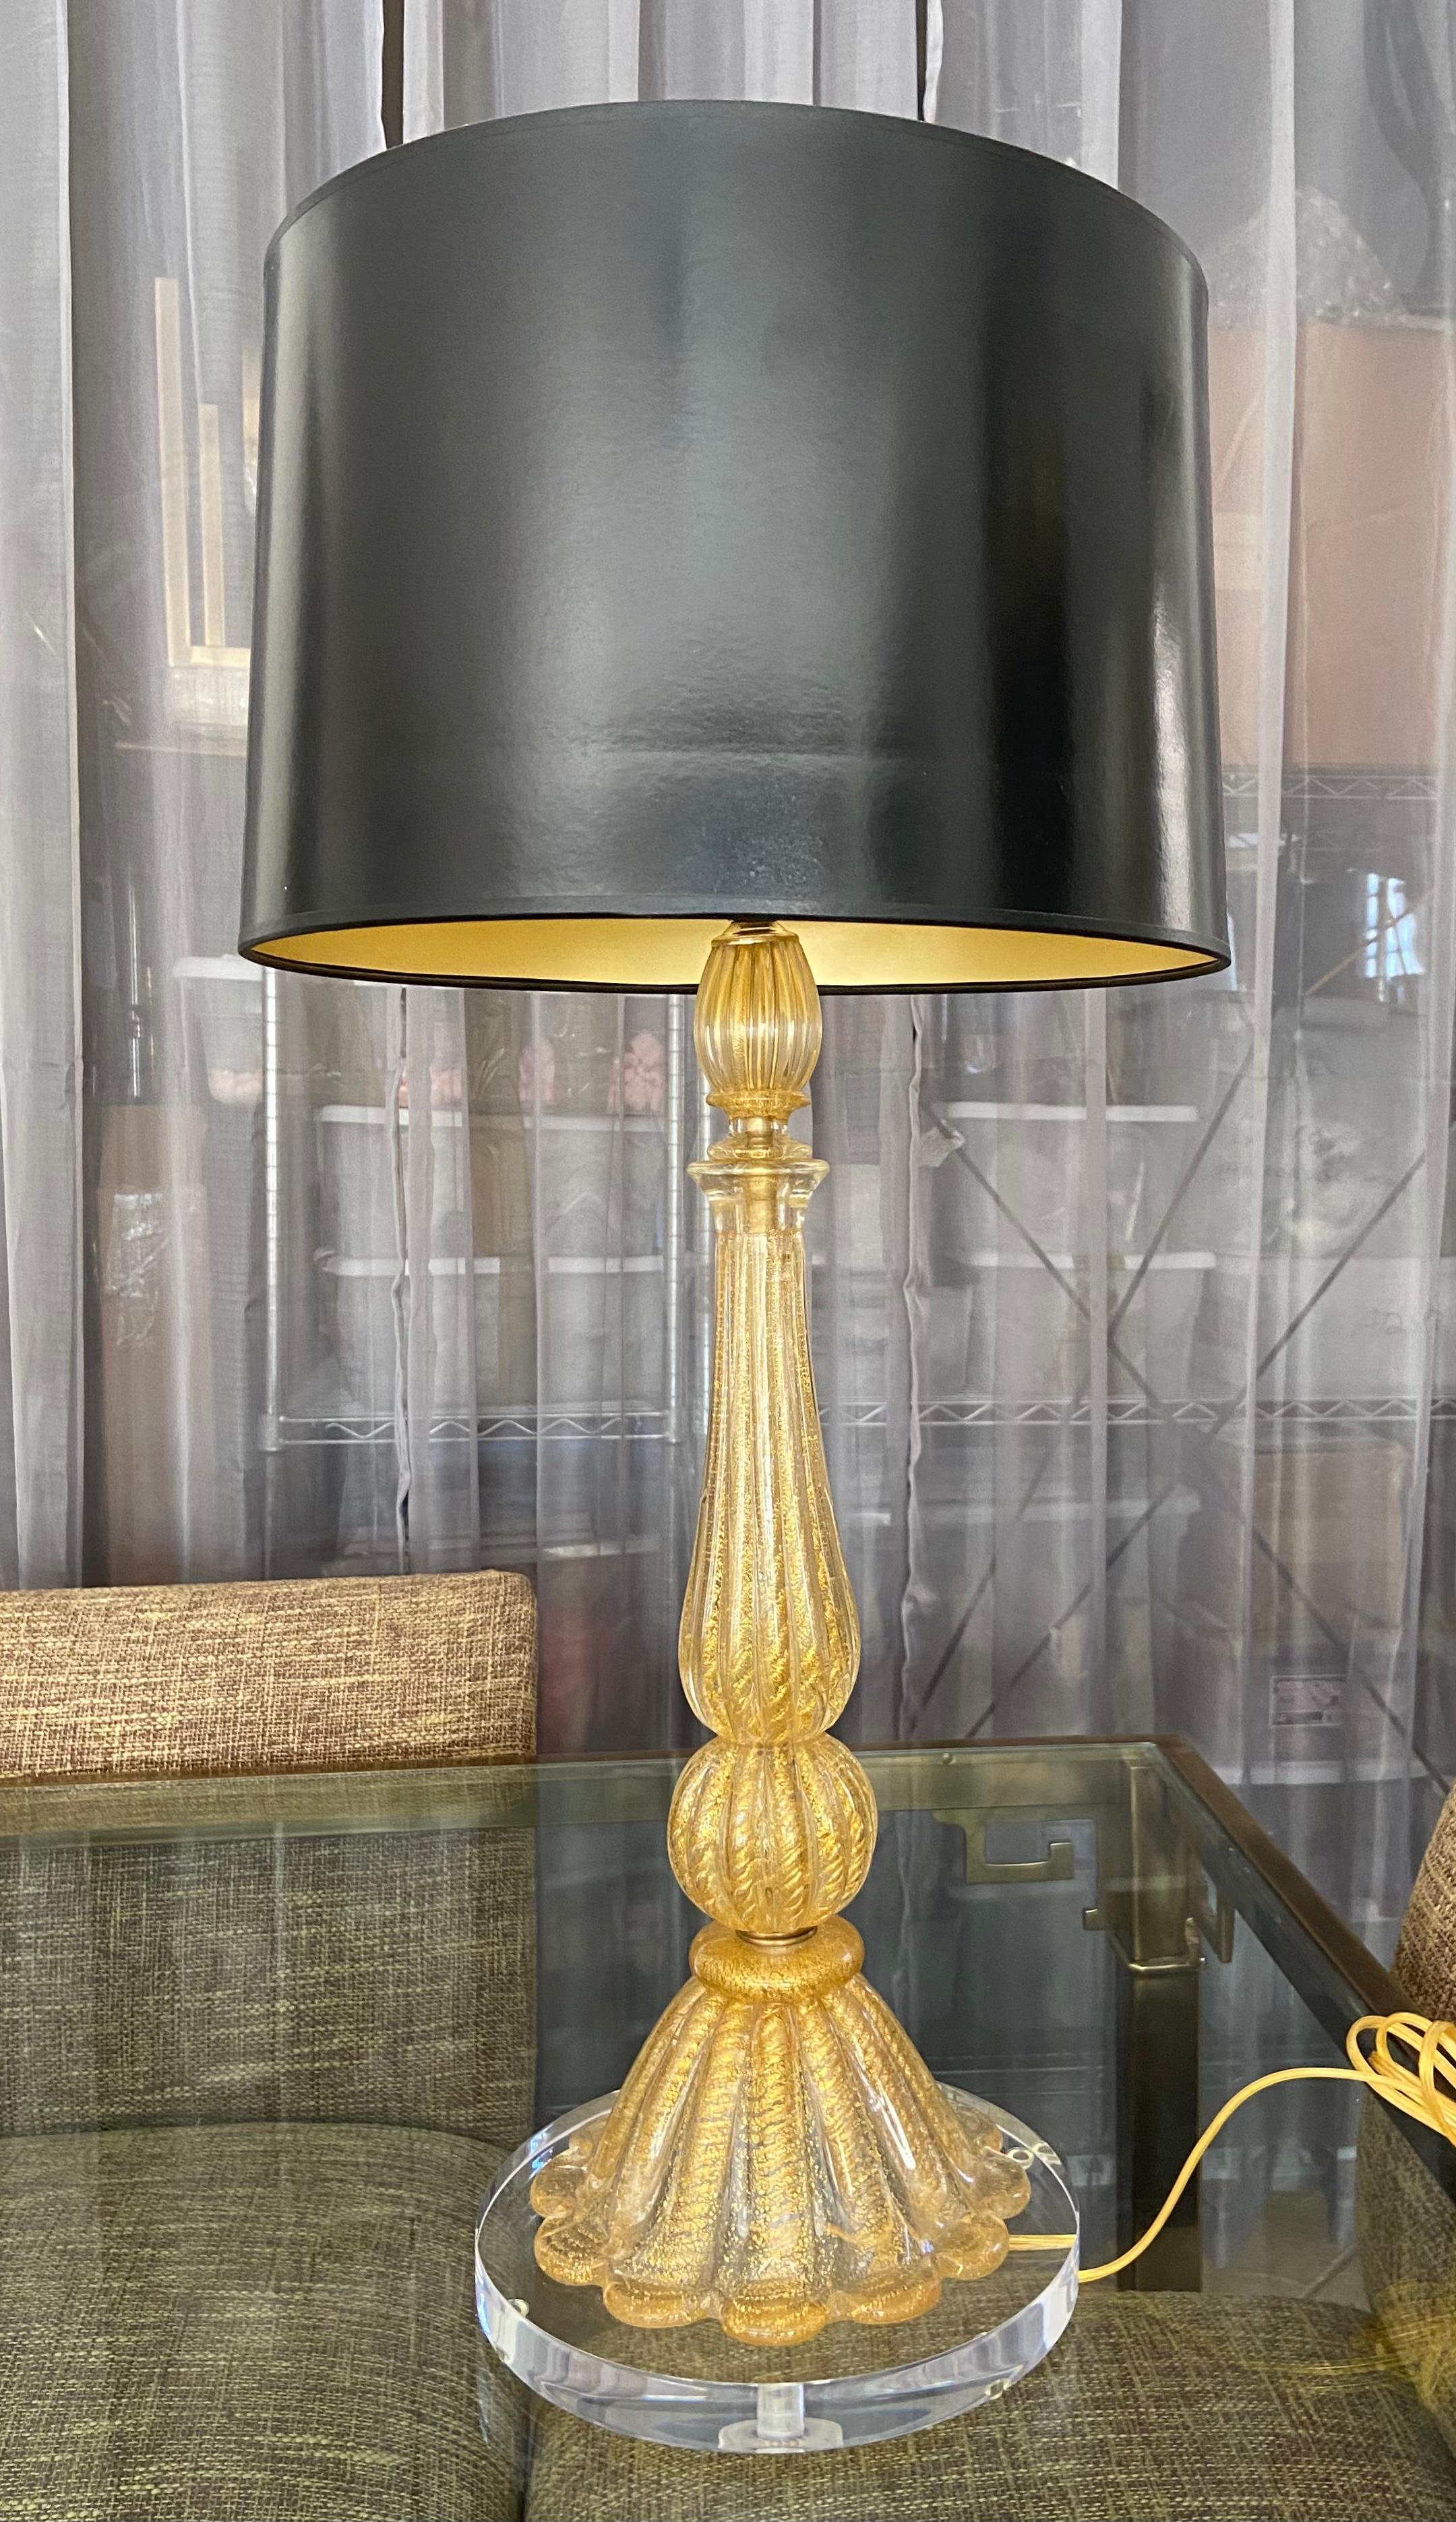 A Barovier & Toso glass table lamp in the Coronado d'ore technique crafted of thick clear glass with gold inclusions. Newly wired for the US with new 3 way brass socket and cord. Mounted on newer custom acrylic base. Shade not included
Measures: